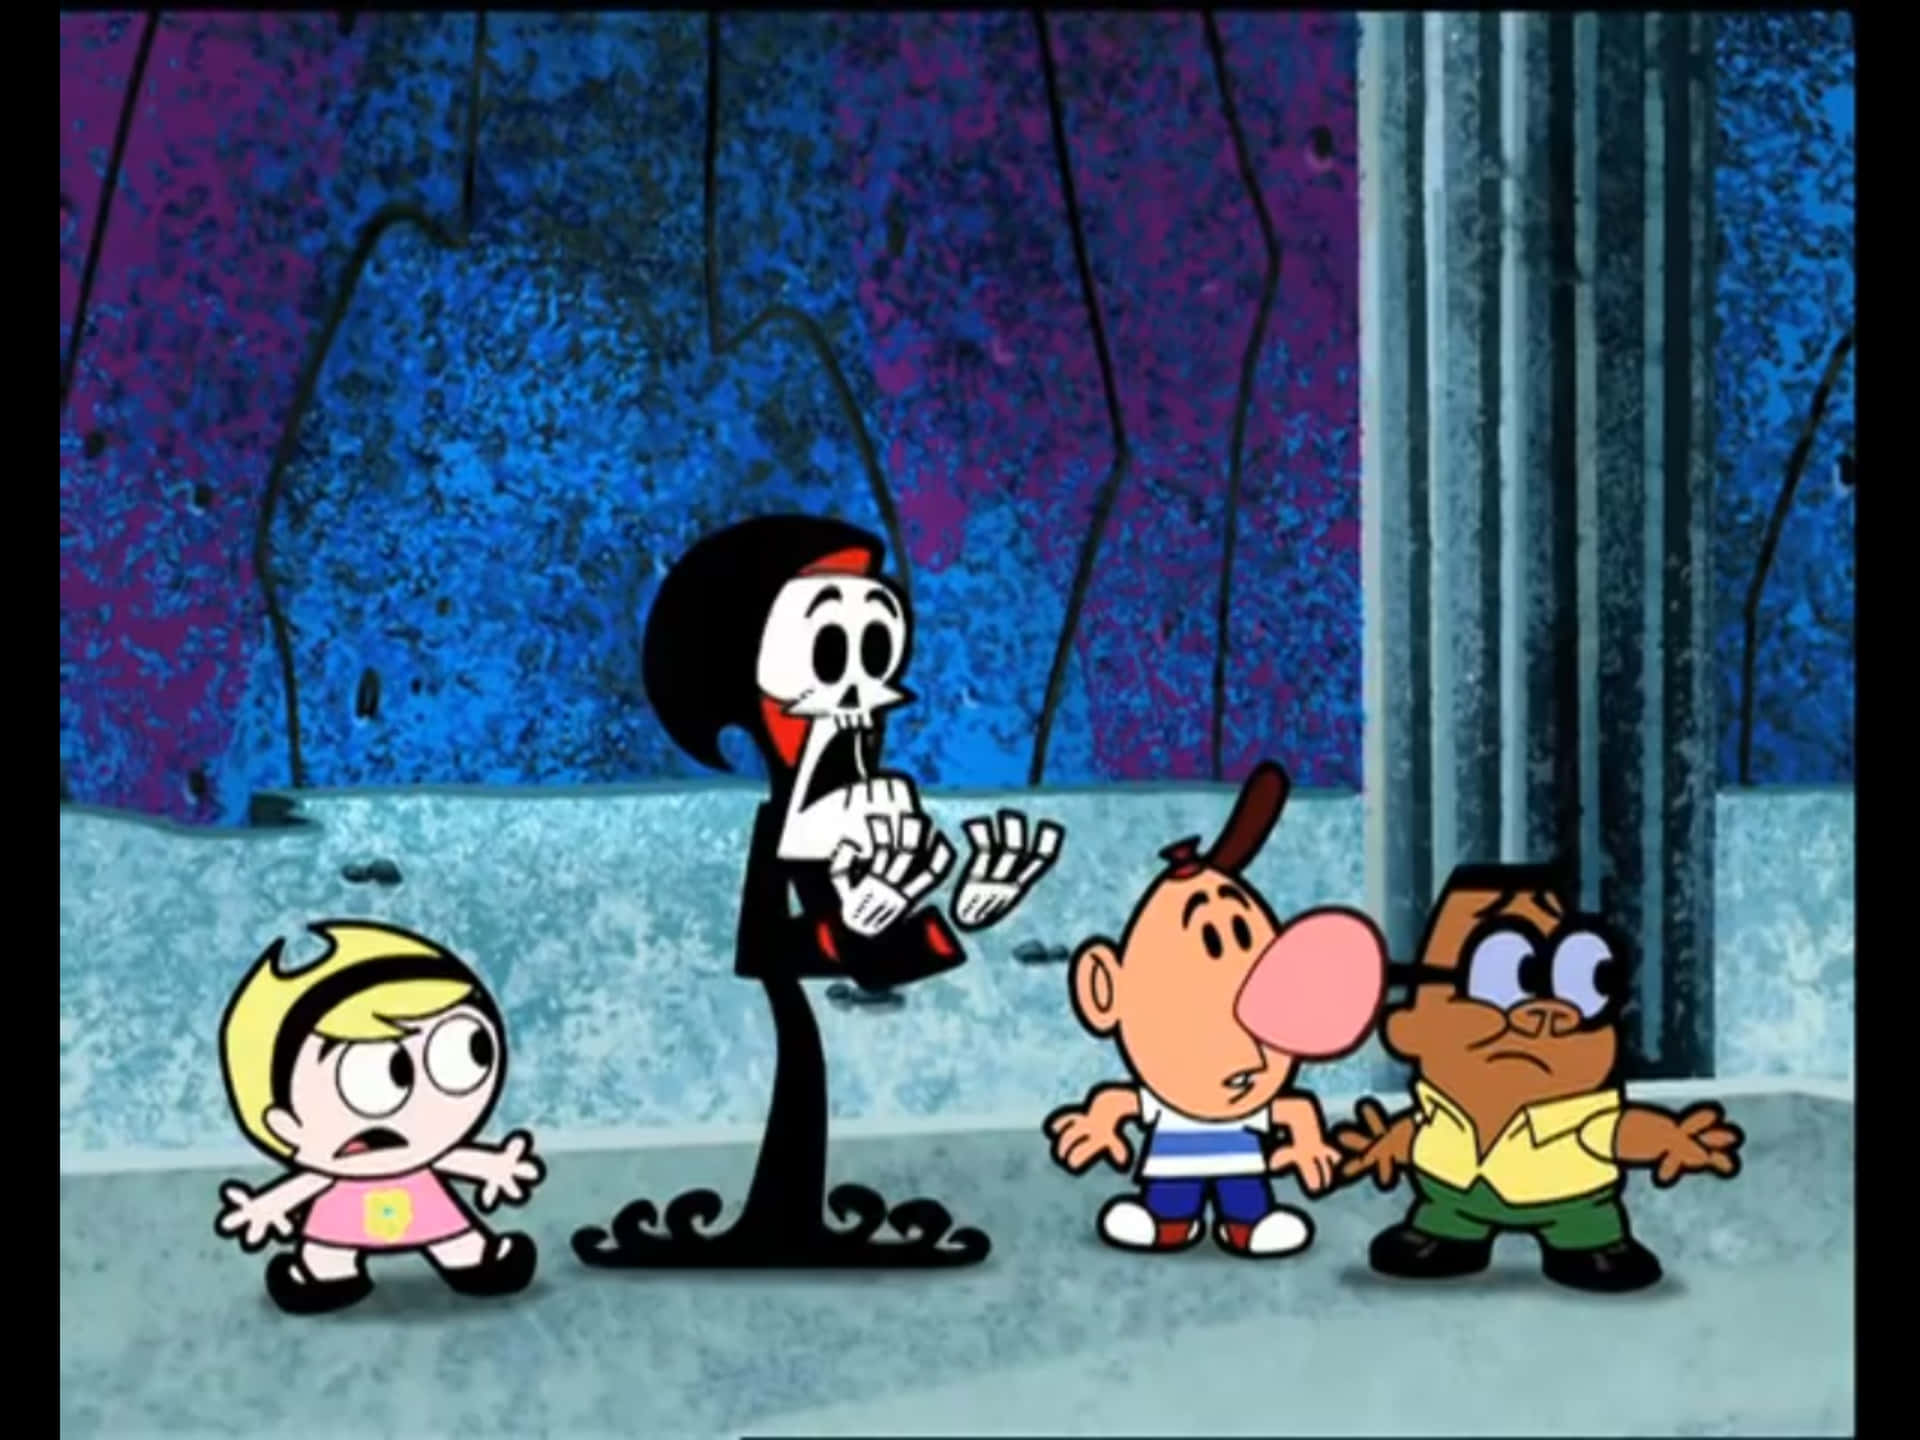 Grim Reaper, Billy, and Mandy in an adventurous scene from The Grim Adventures of Billy and Mandy Wallpaper